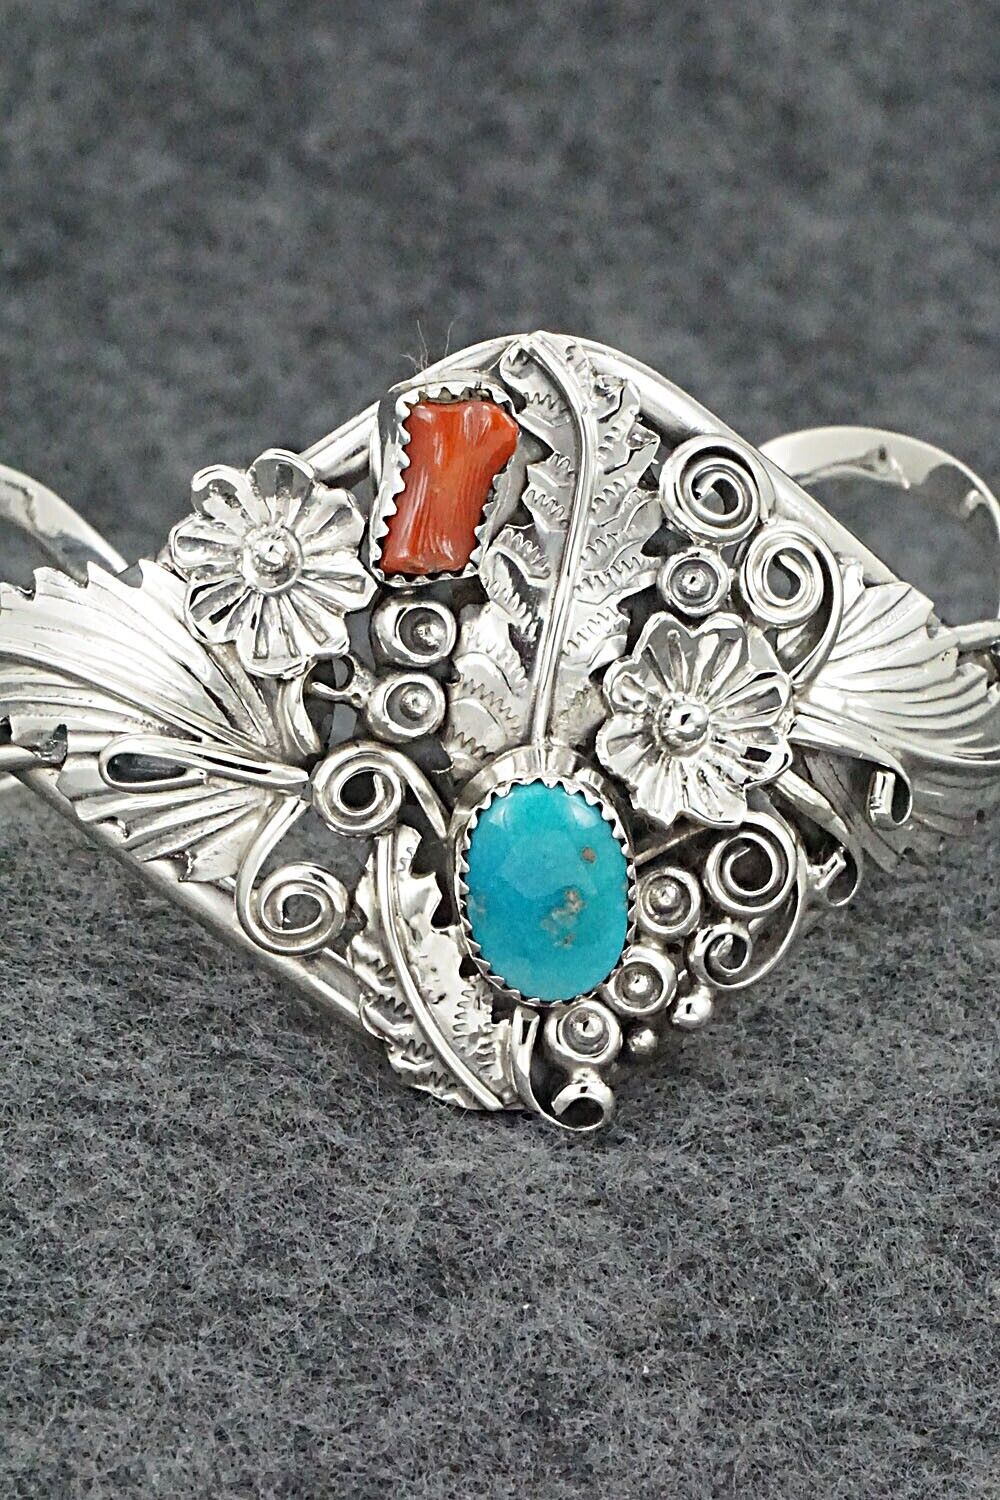 Turquoise, Coral & Sterling Silver Bracelet - Harry B. Yazzie